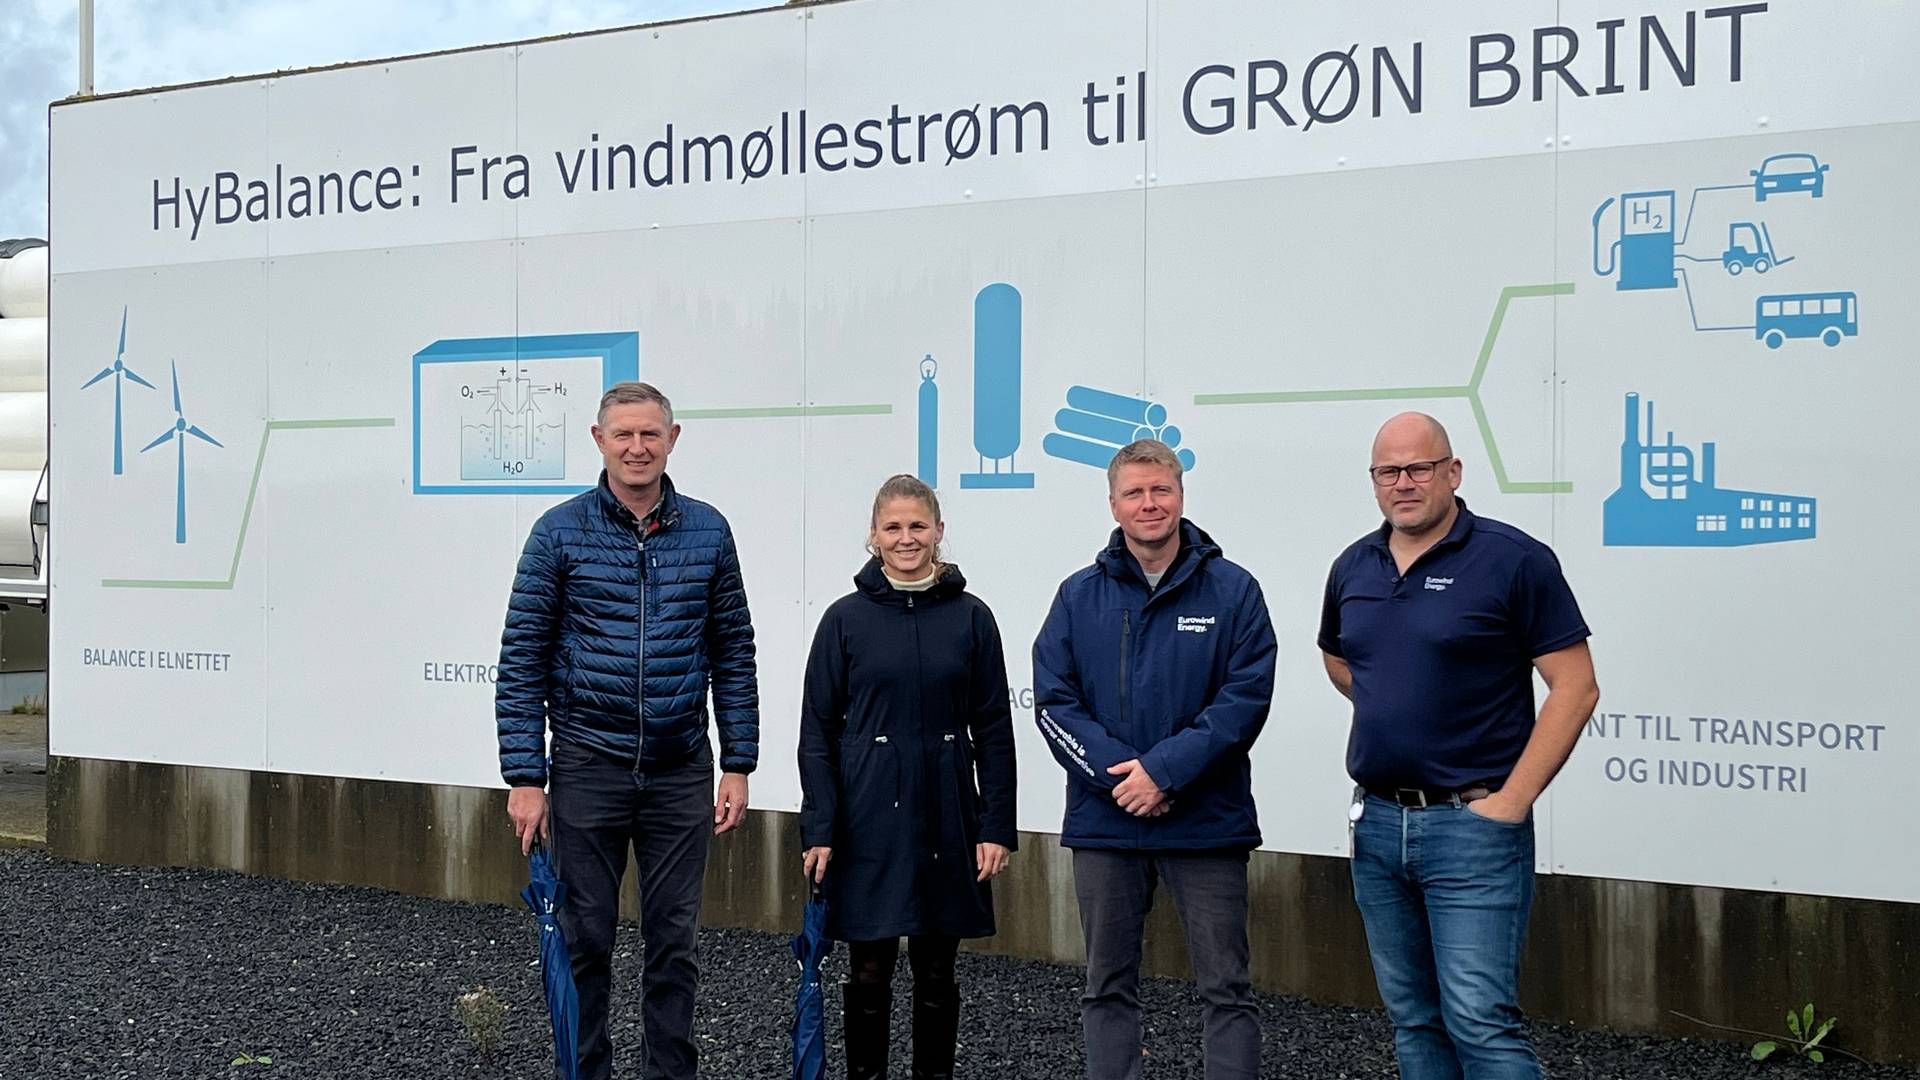 From left to right: Eurowind CEO Jens Rasmussen together with people from the company's Special Task Unit, which will be responsible for the new facility. | Photo: Eurowind Pr